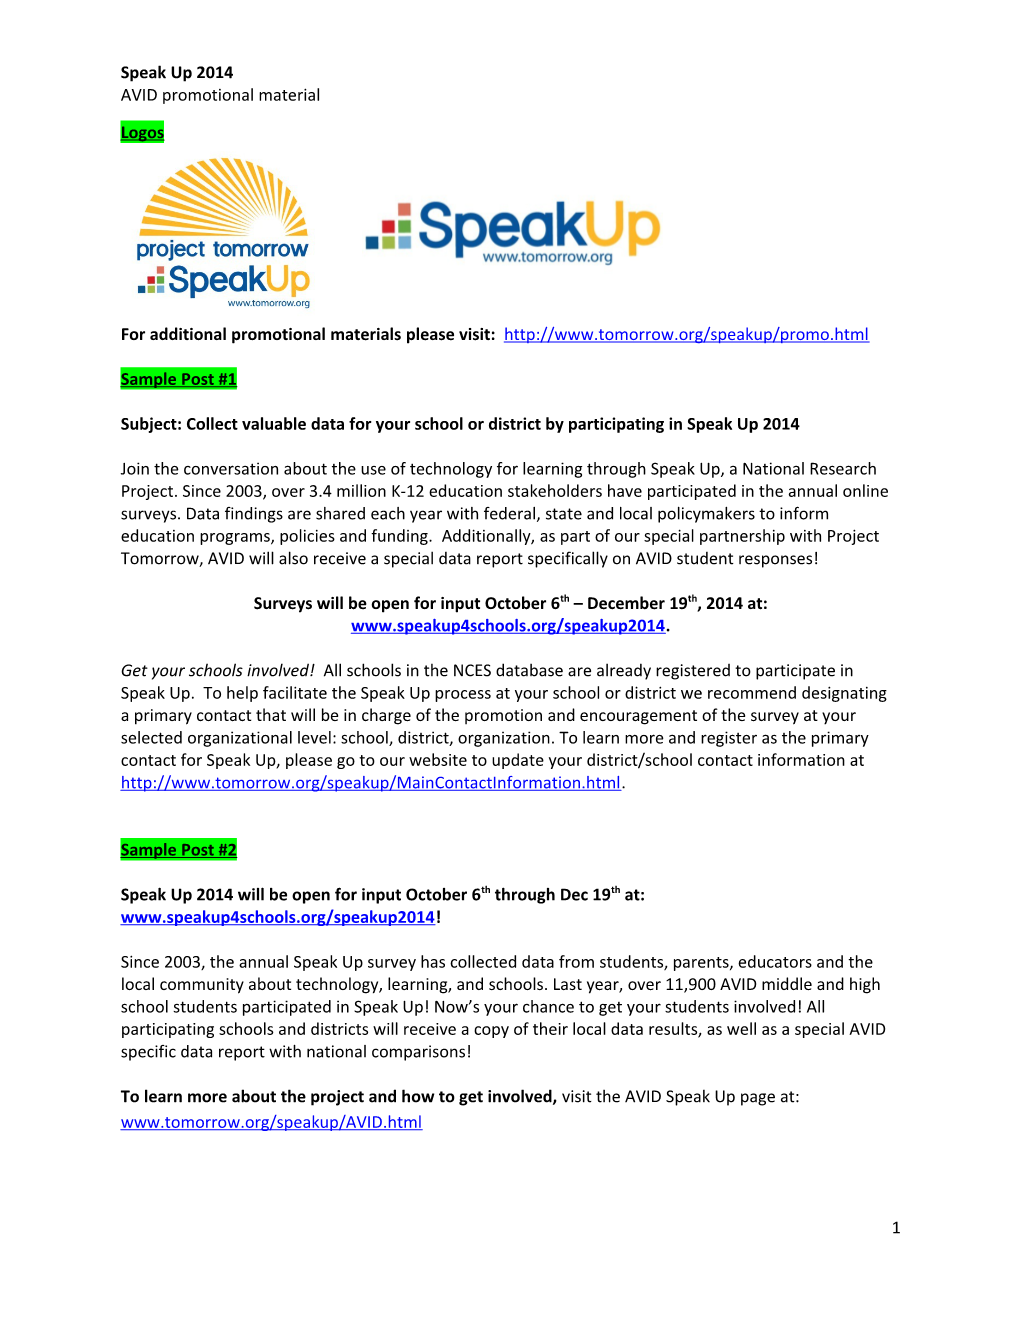 Subject: Collect Valuable Data for Your School Or District by Participating in Speak up 2014